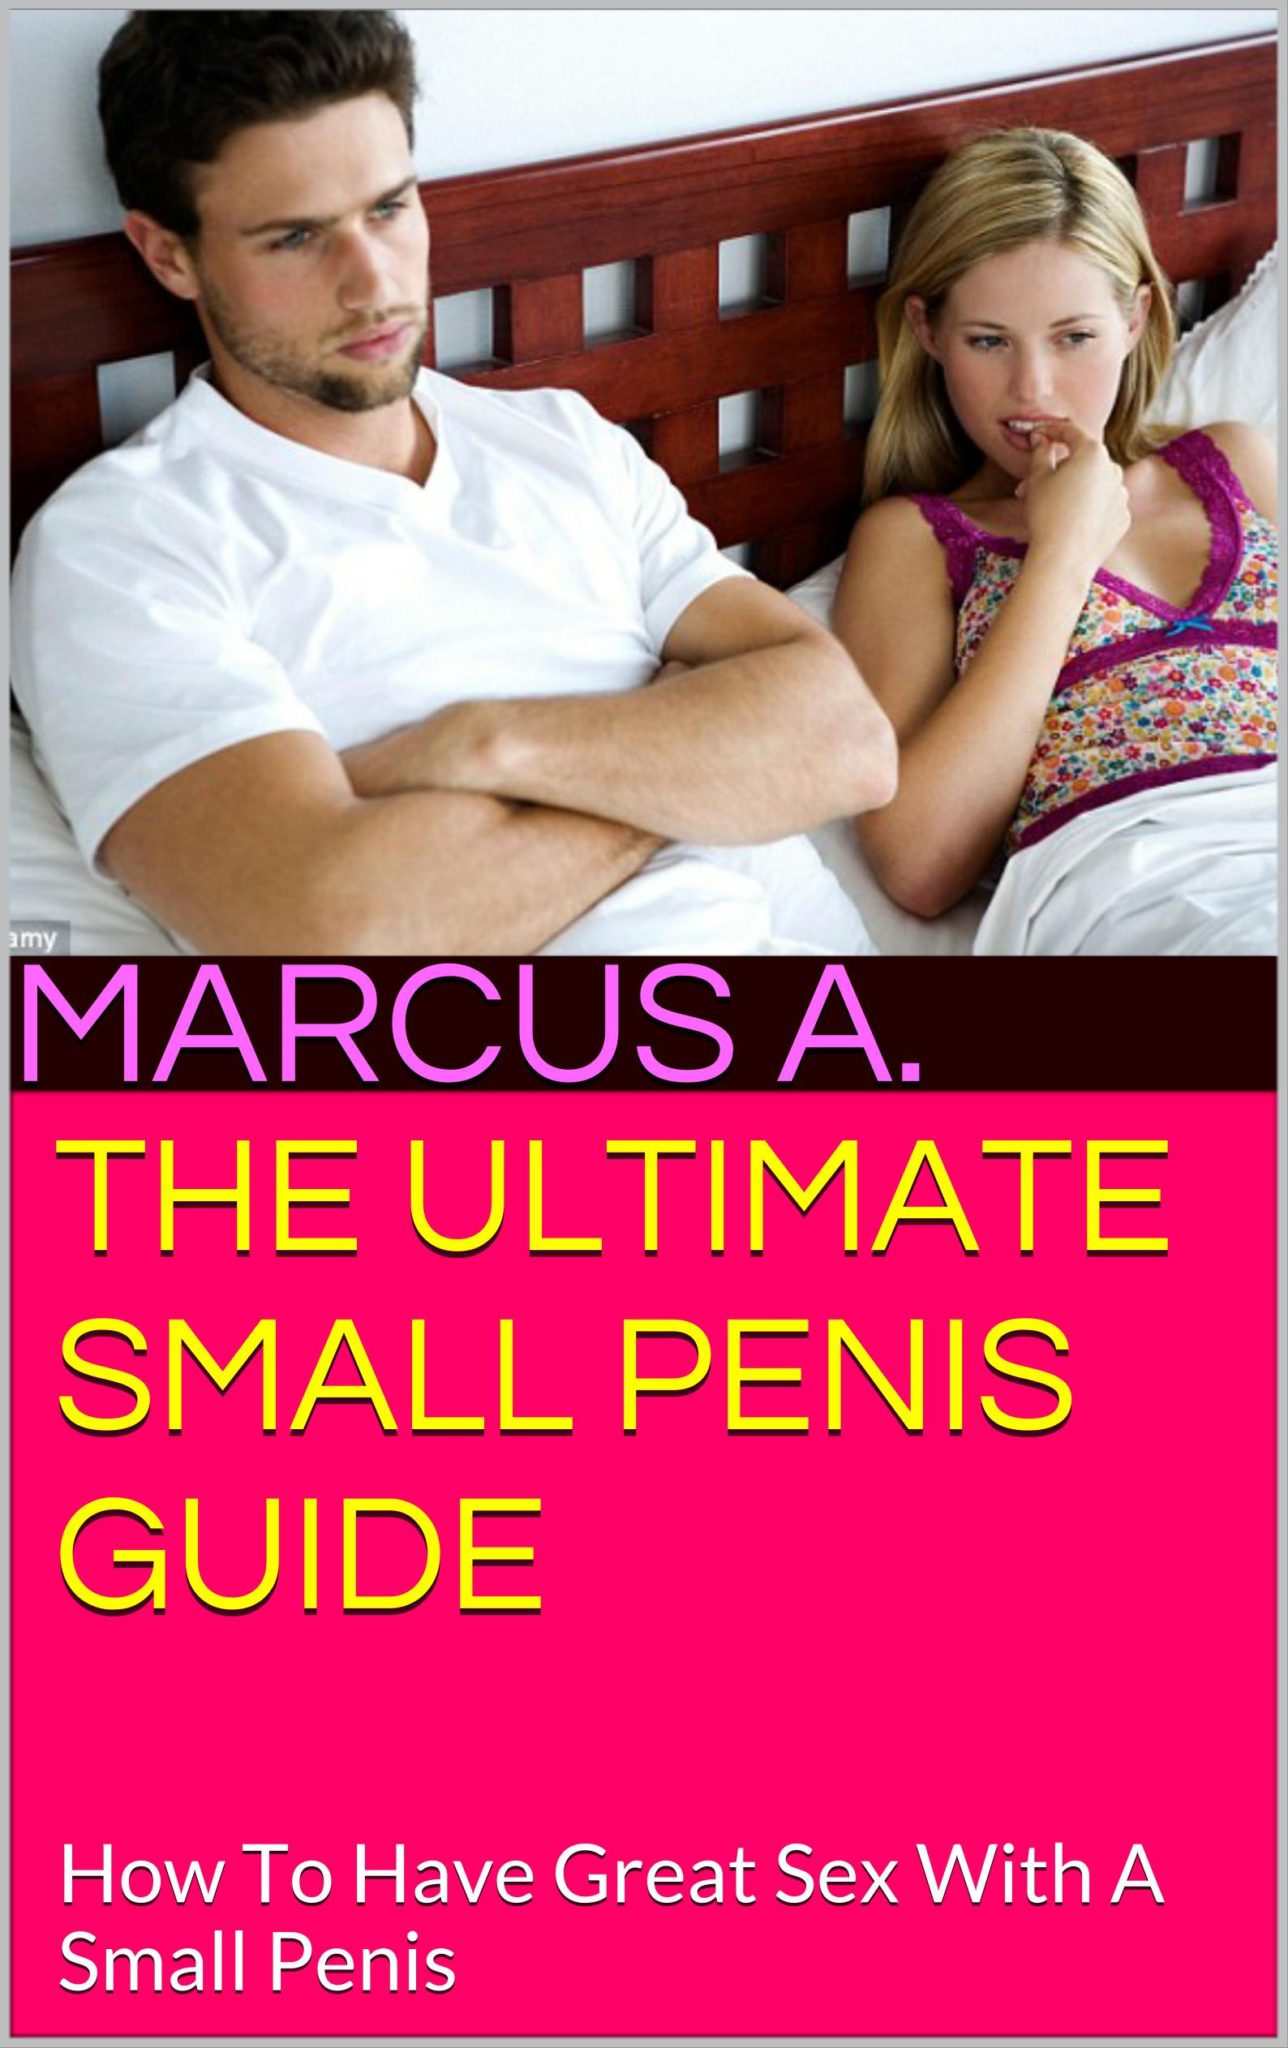 The Ultimate Small Penis Guide To A Better Sex Life by Marcus A.